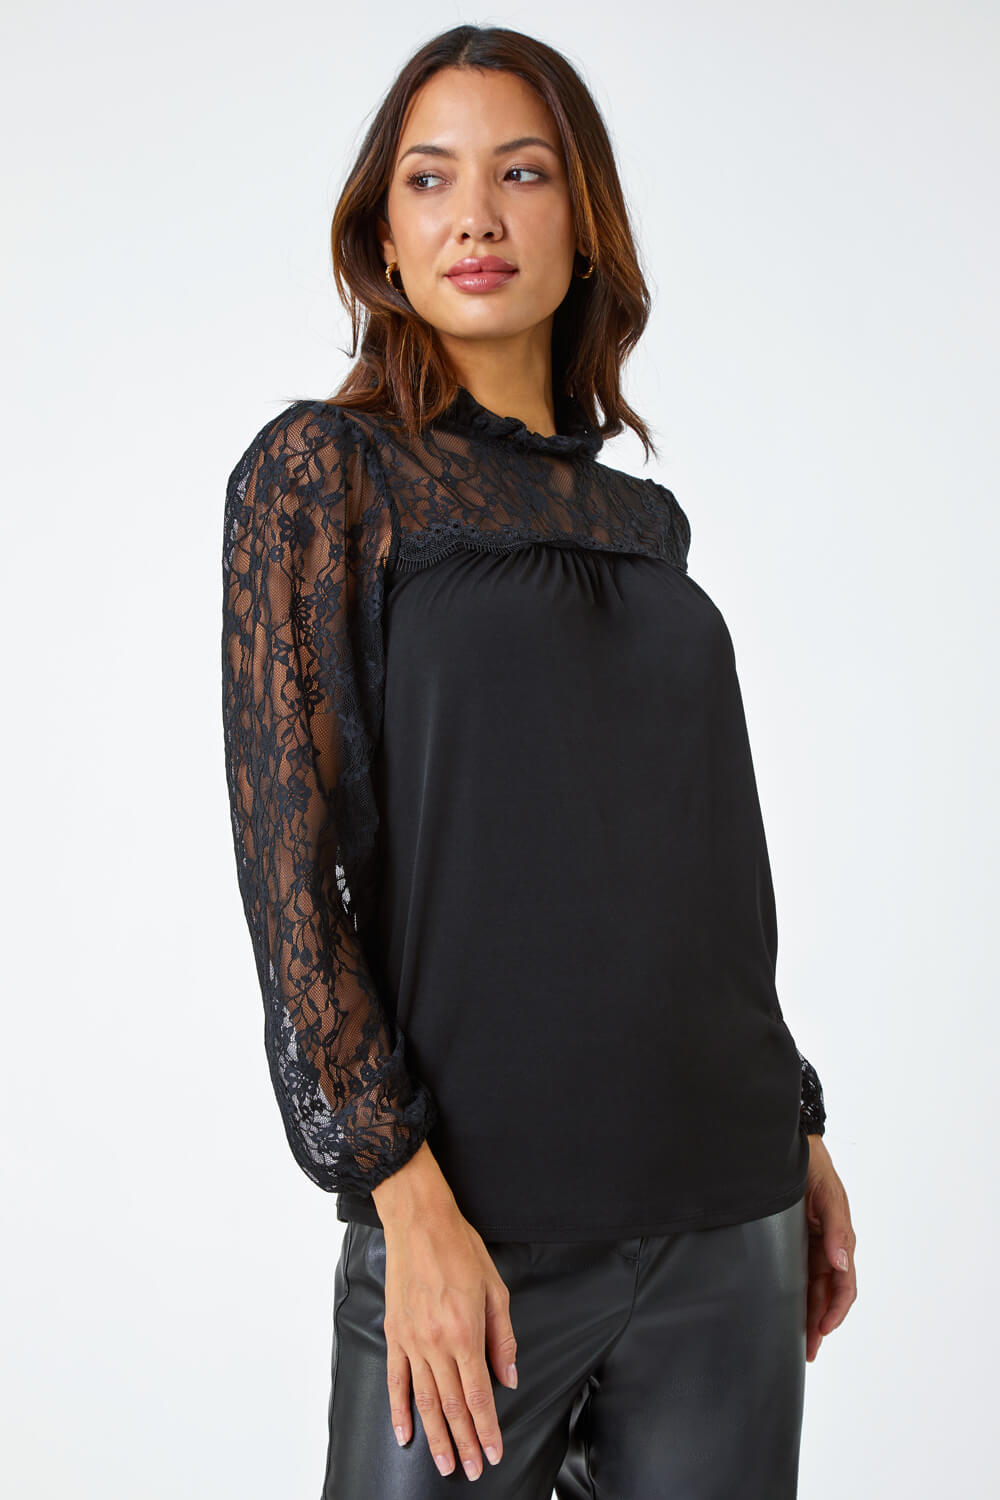 Black Lace Detail High Neck Stretch Top, Image 2 of 5